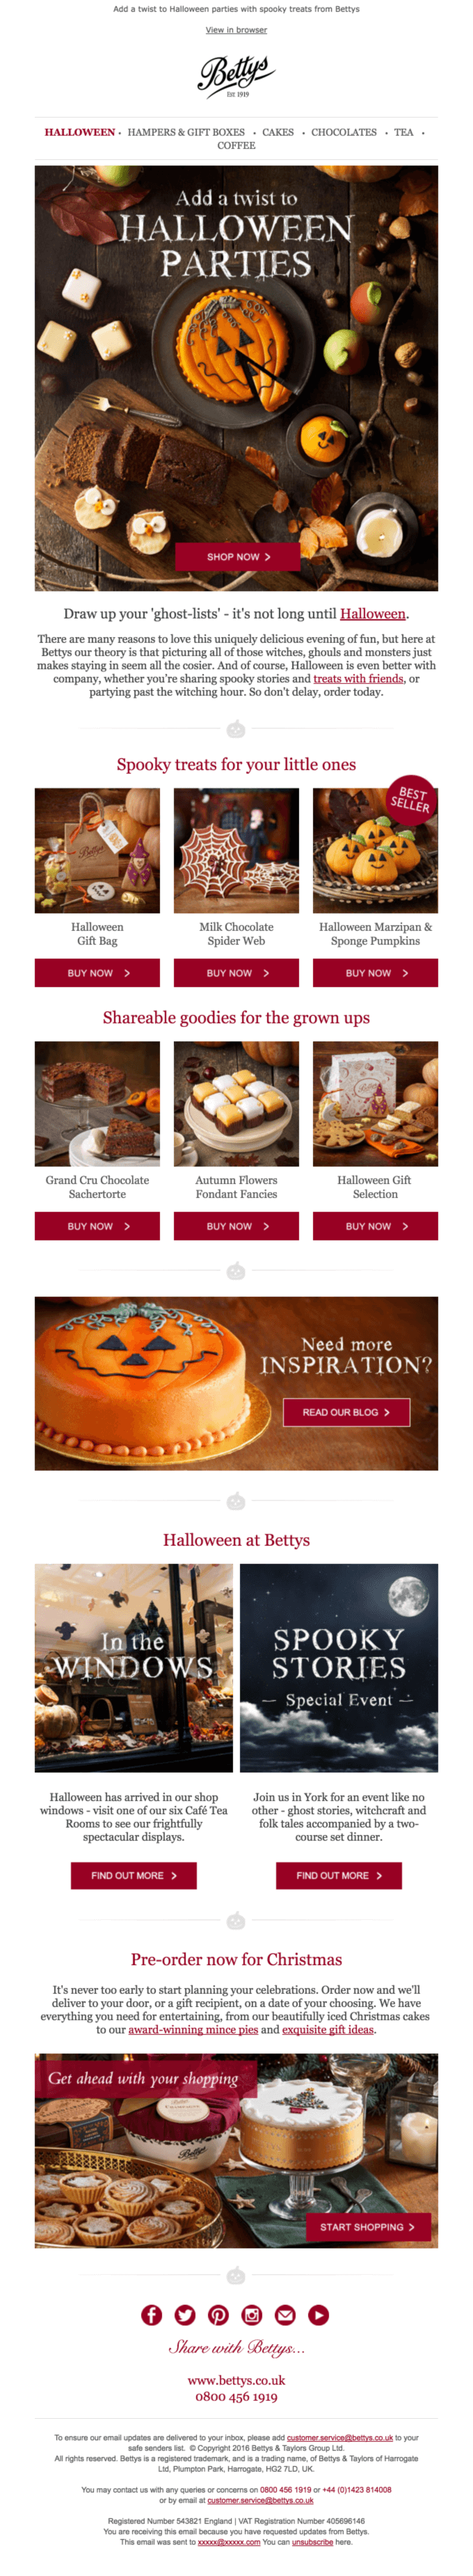 Bettys Halloween-themed email with a selection of Halloween treats.